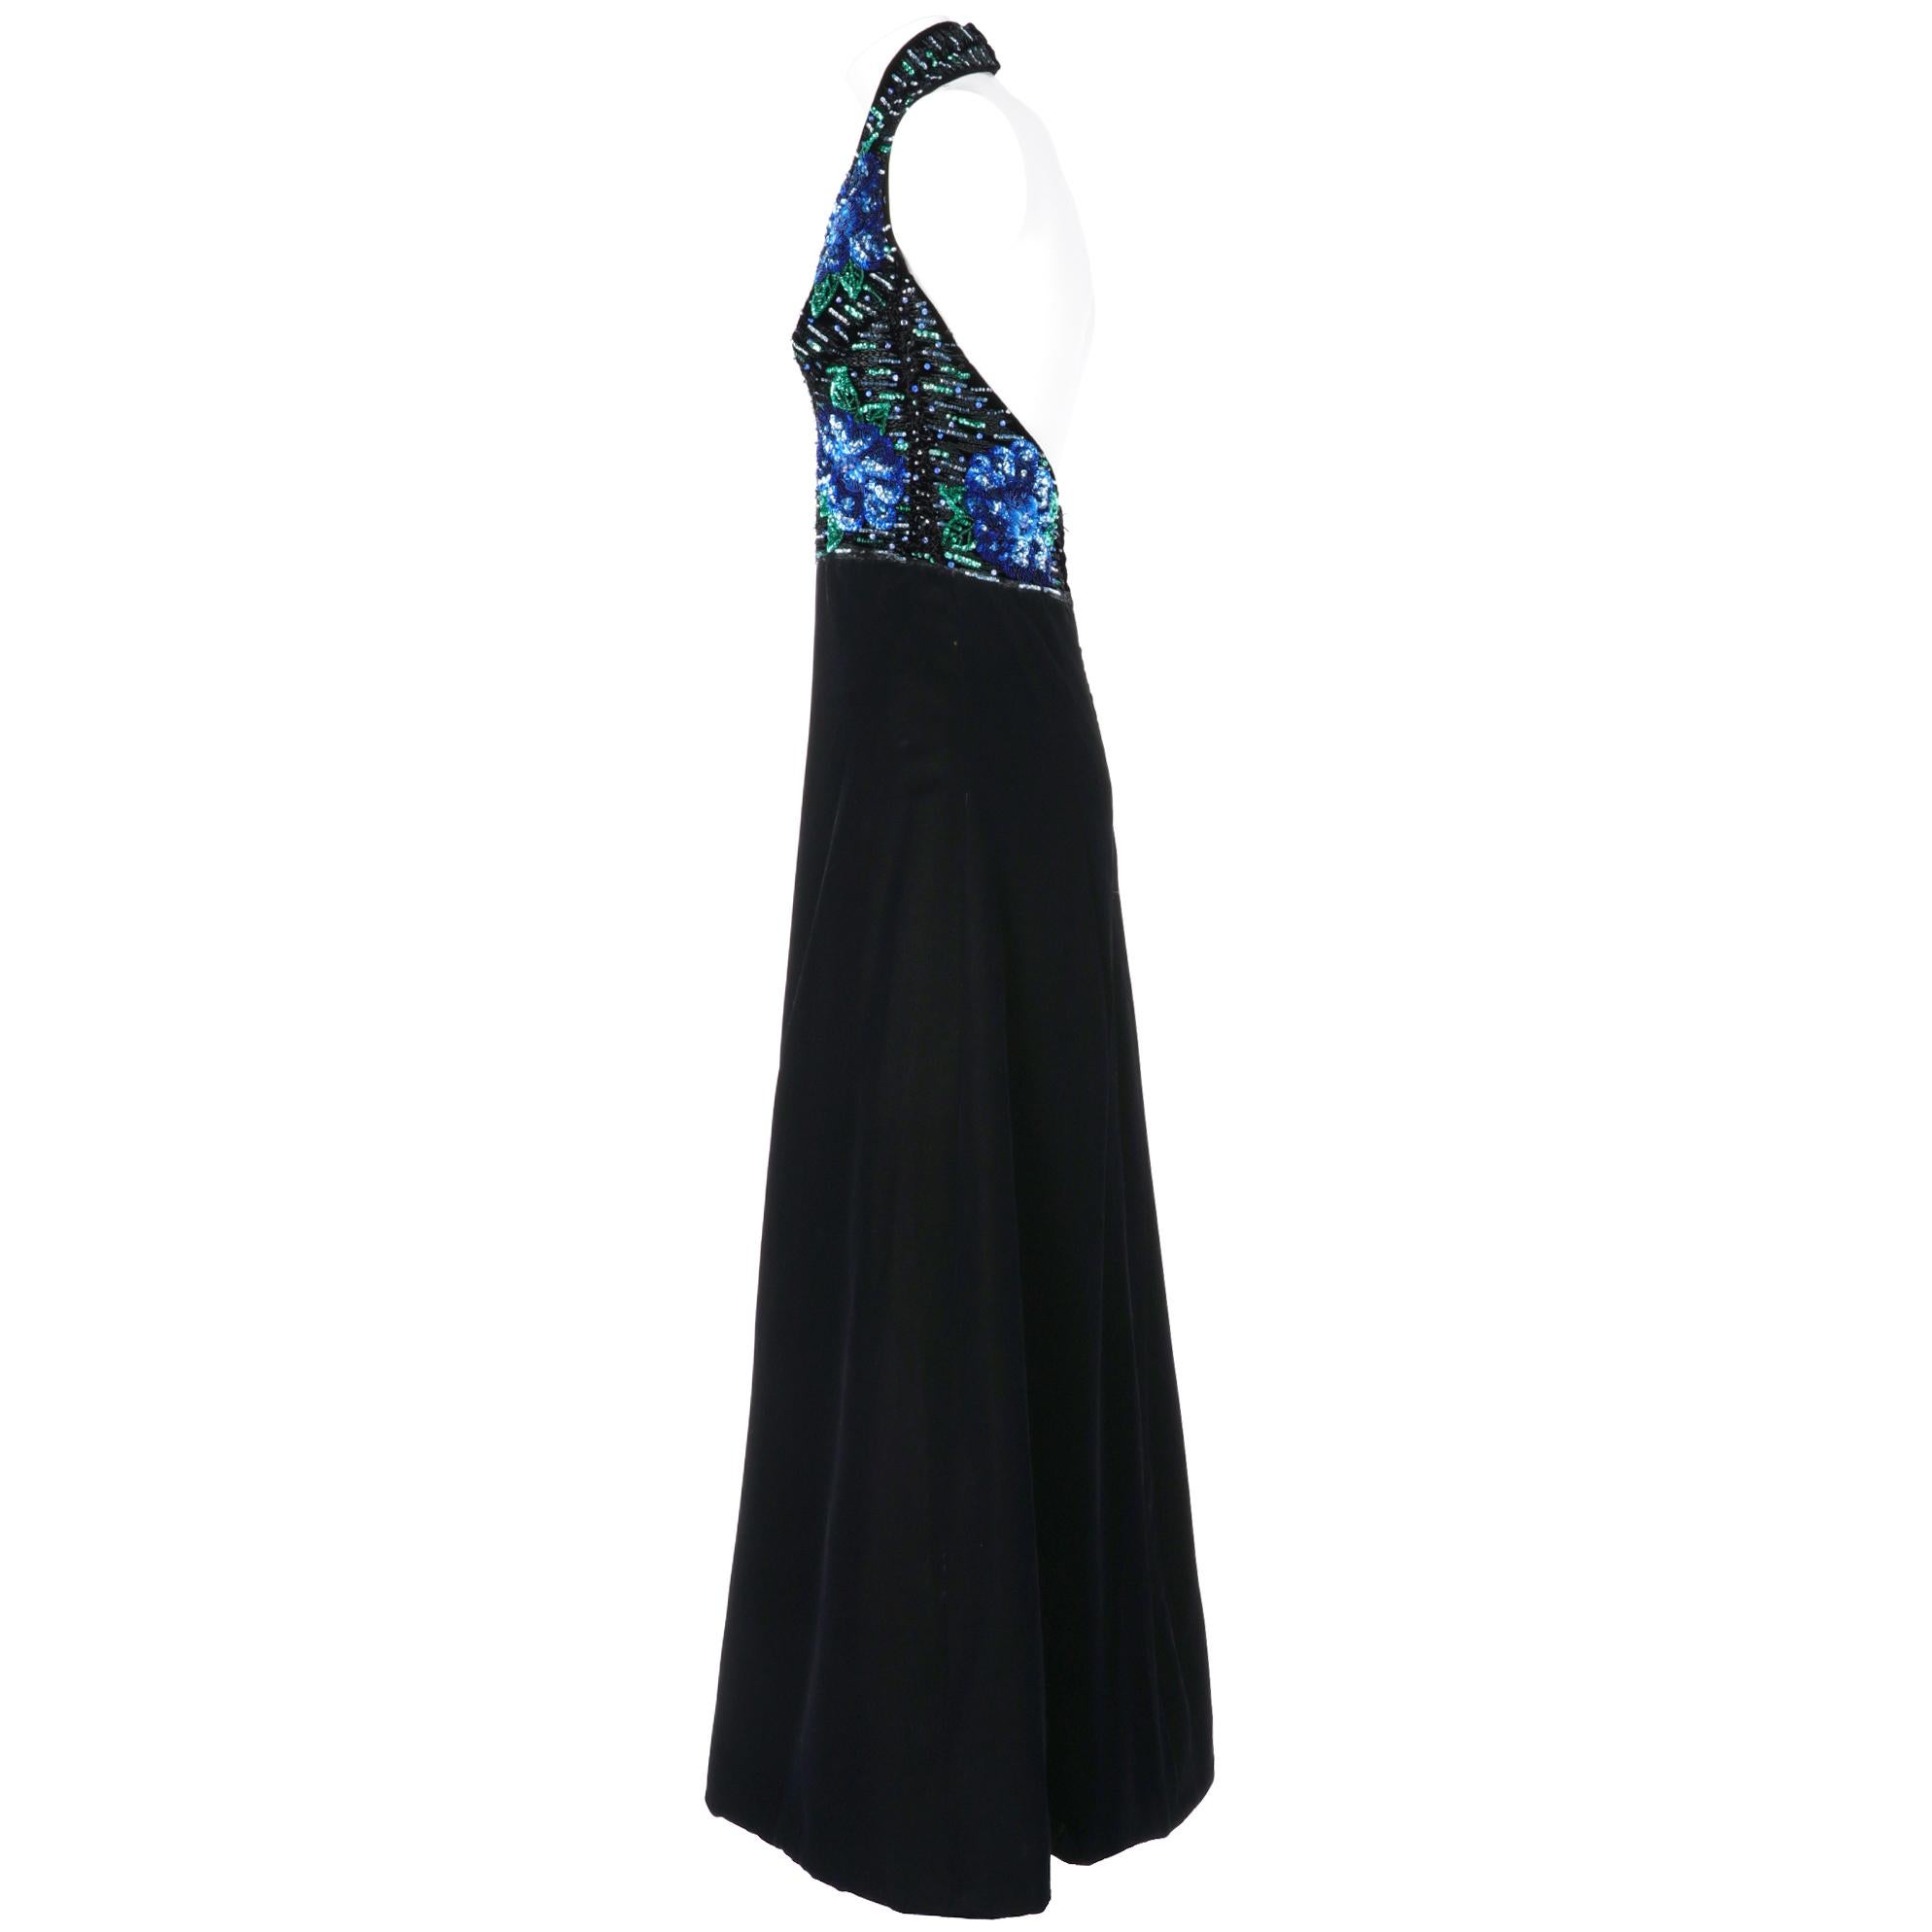 Stop Sénès long dress with empire black cotton velvet skirt and top with decorative stitching and sequins and rhinestones in shades of blue, light blue and green, V-neck and back zip closure on the shoulder and hooks in the neck. Lined